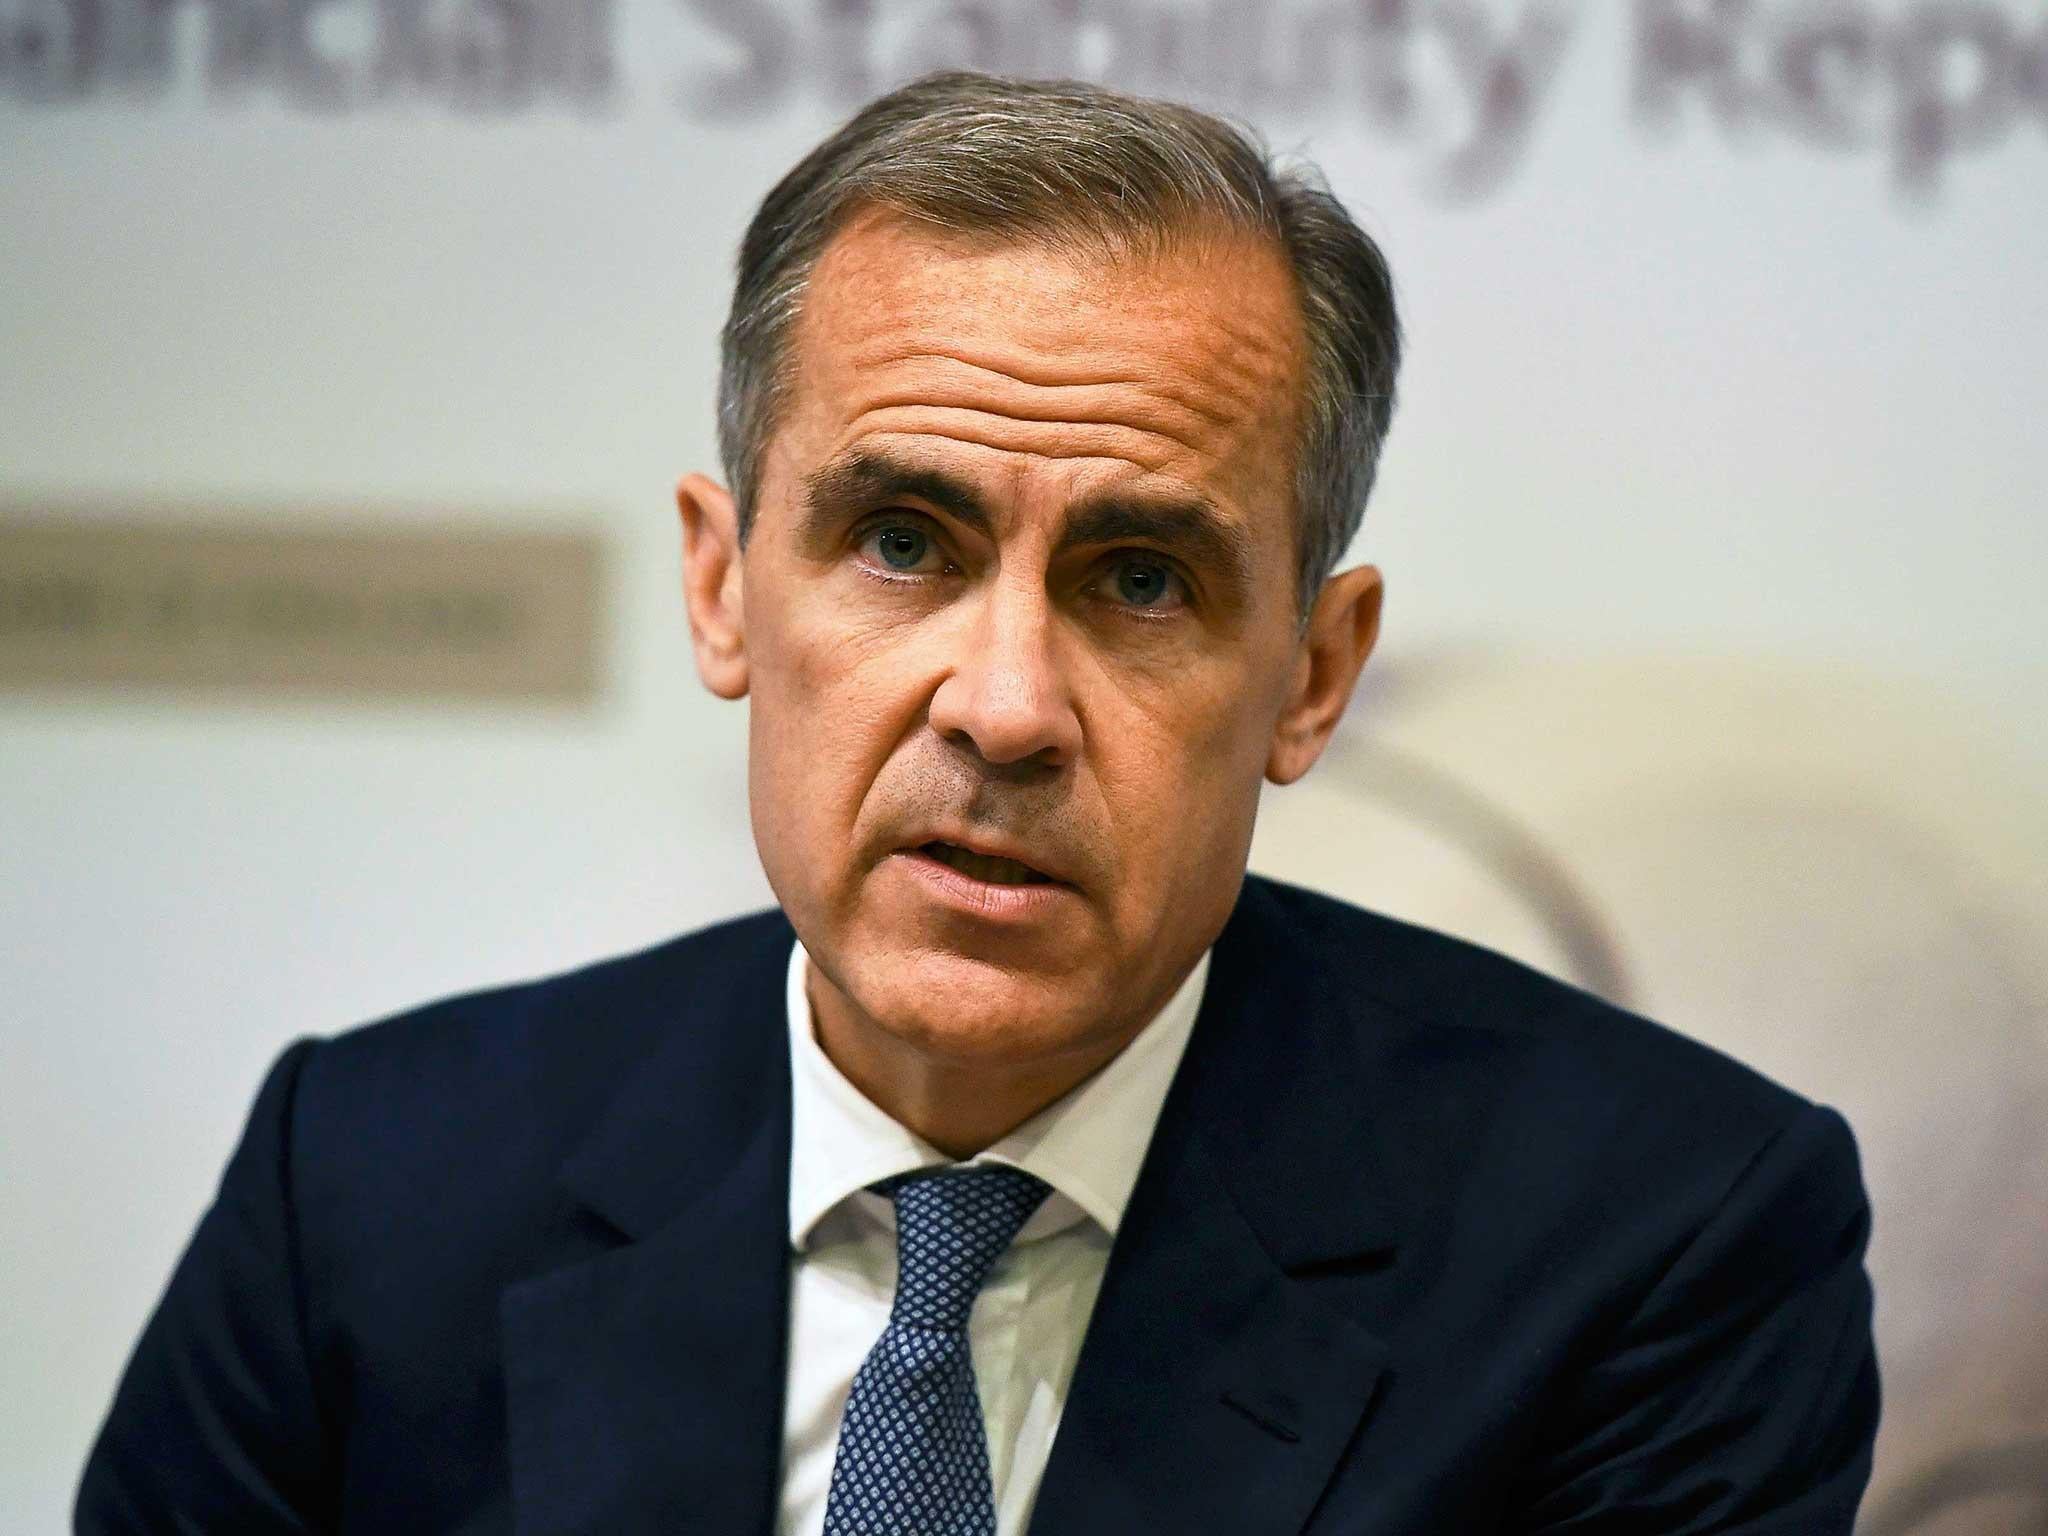 Bank of England governor Mark Carney speaks during a news conference at the Bank of England in London